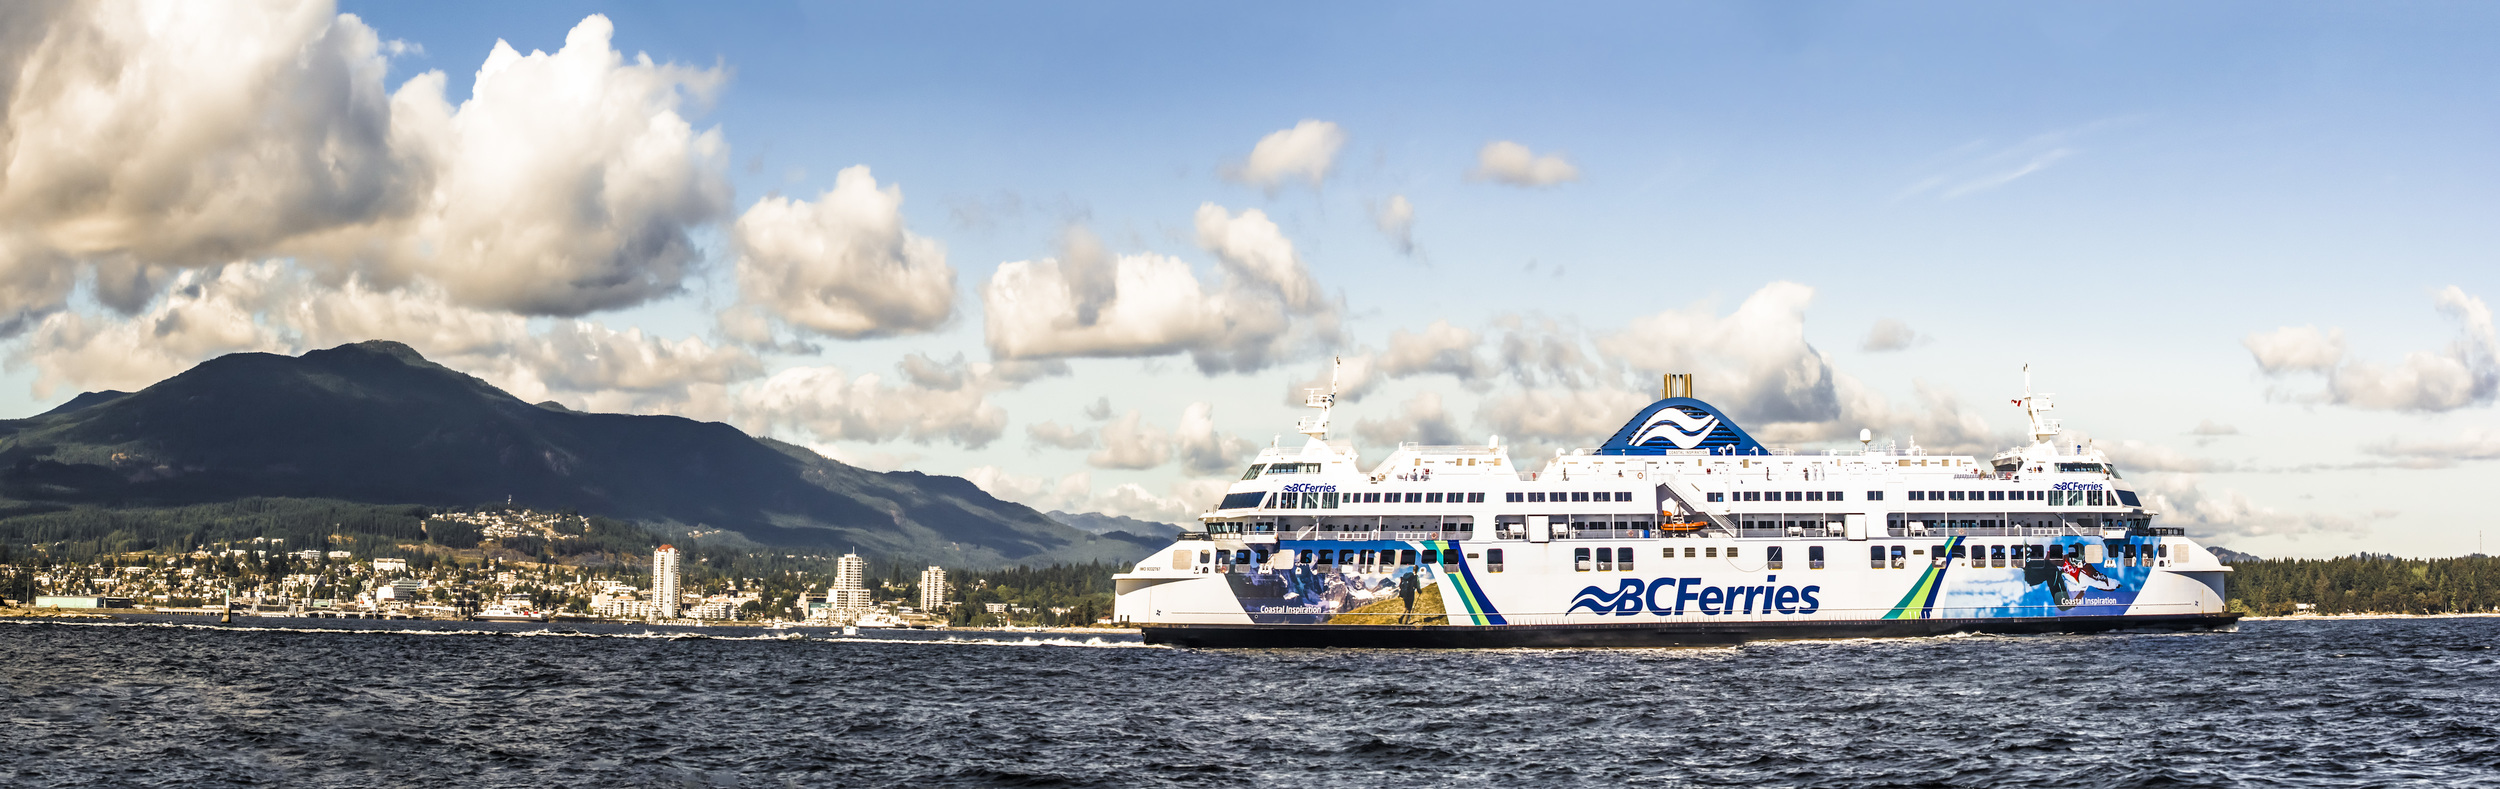 bc Ferry coming in towards Nanaimo's harbour